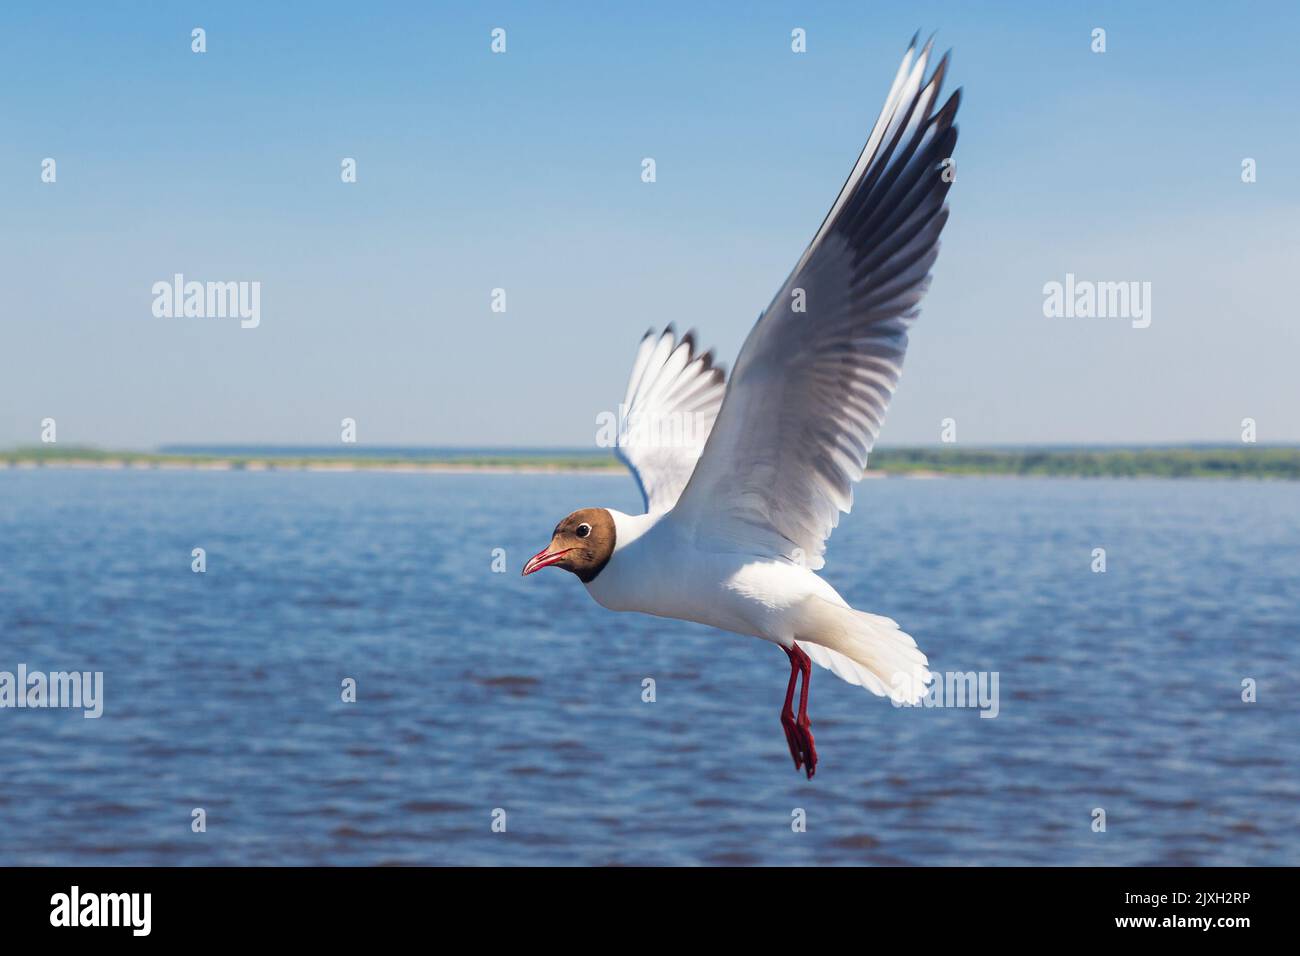 Seagull in flight against the blue sky close-up Stock Photo